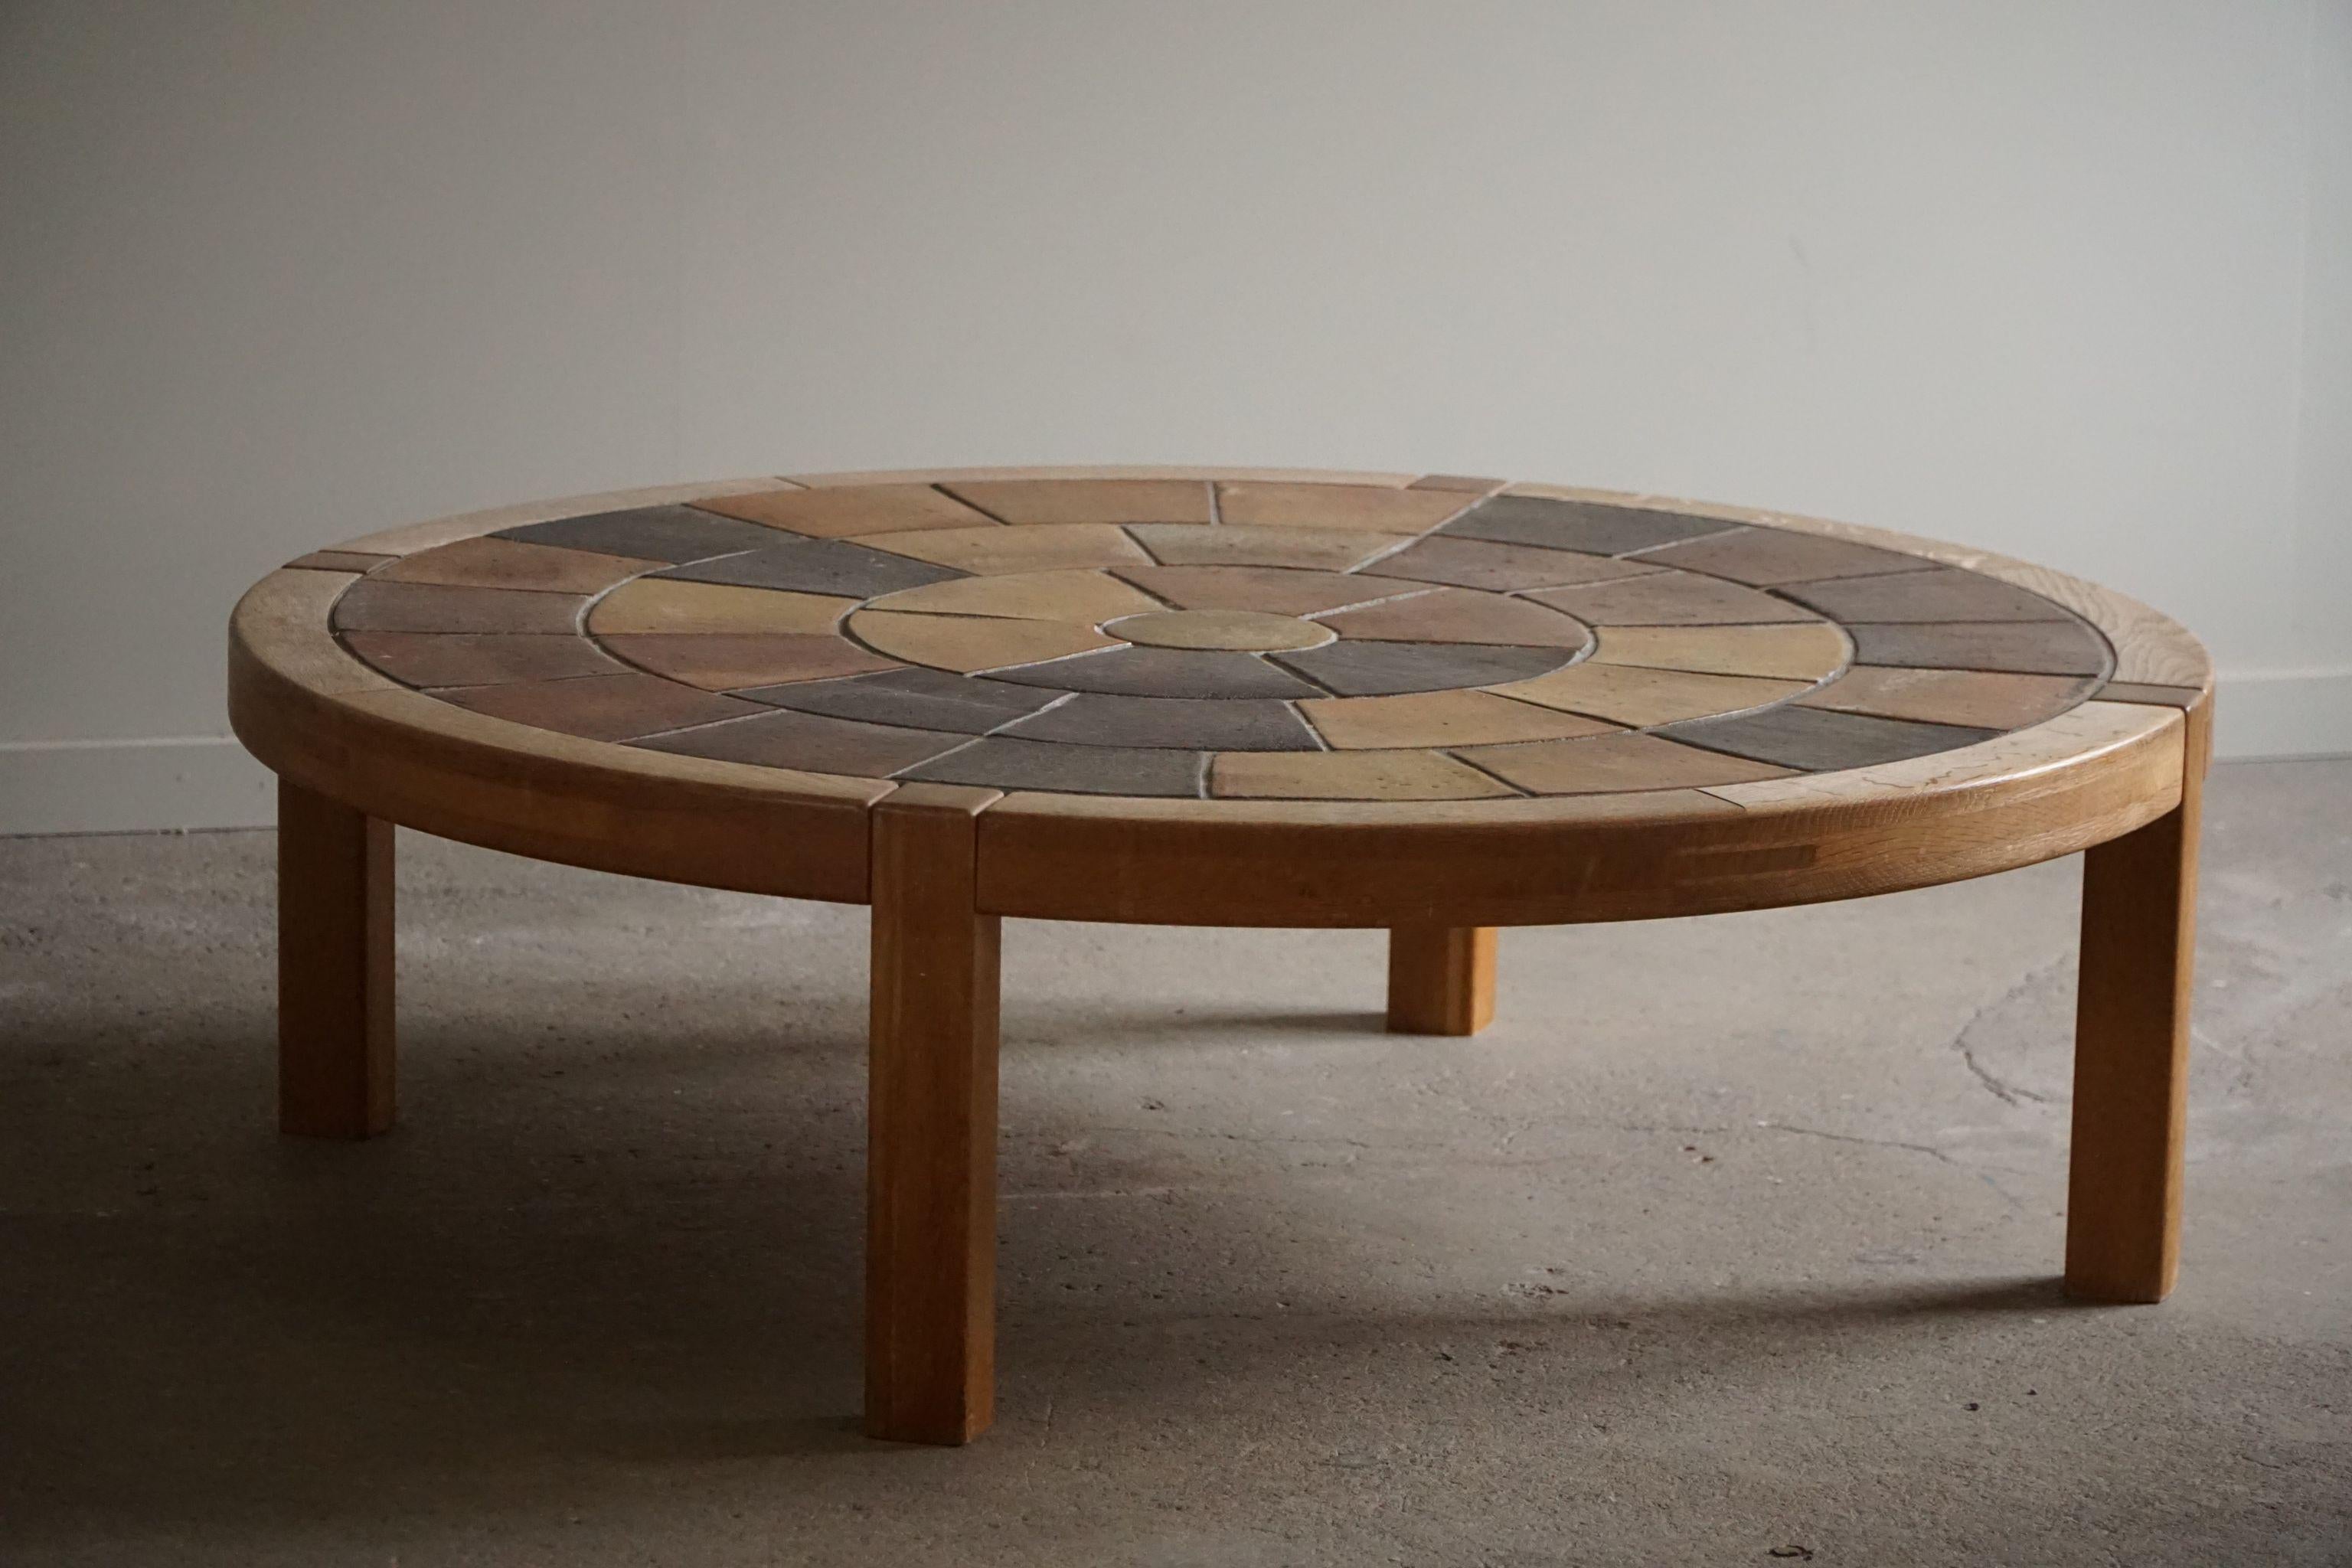 Danish Modern, Round Coffee Table with Ceramic Tiles by Sallingeboe, 1981 For Sale 4